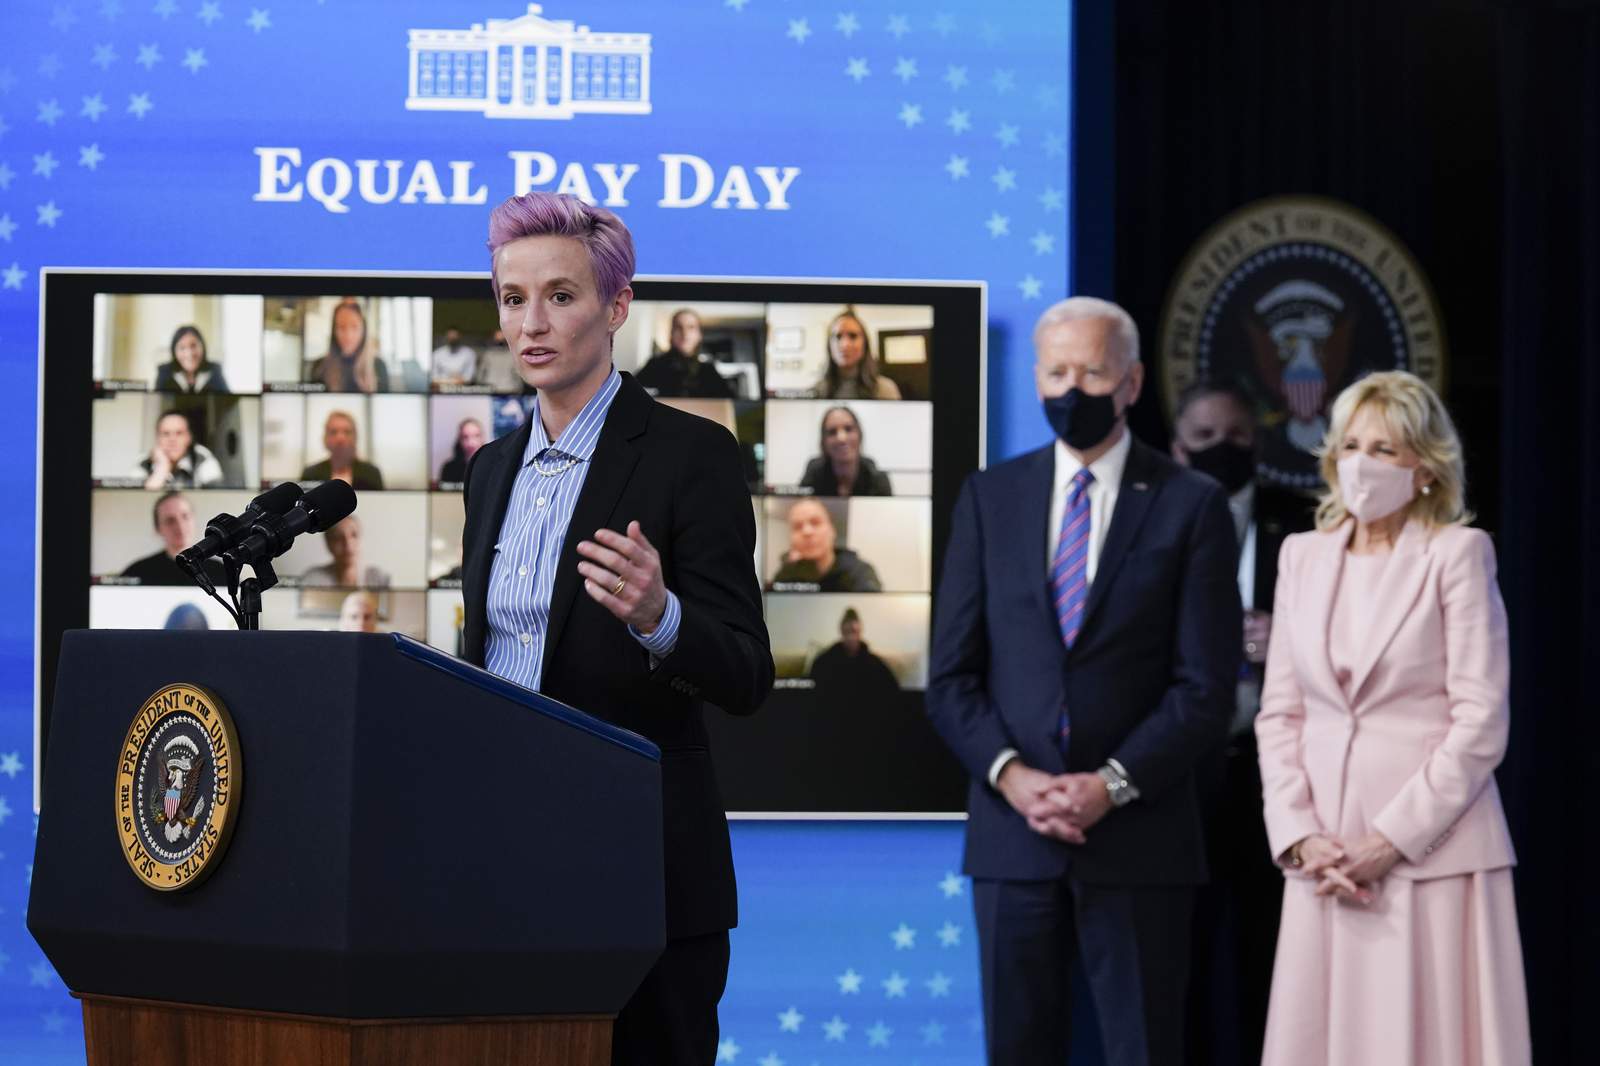 Women's soccer stars join Biden to promote closing pay gap